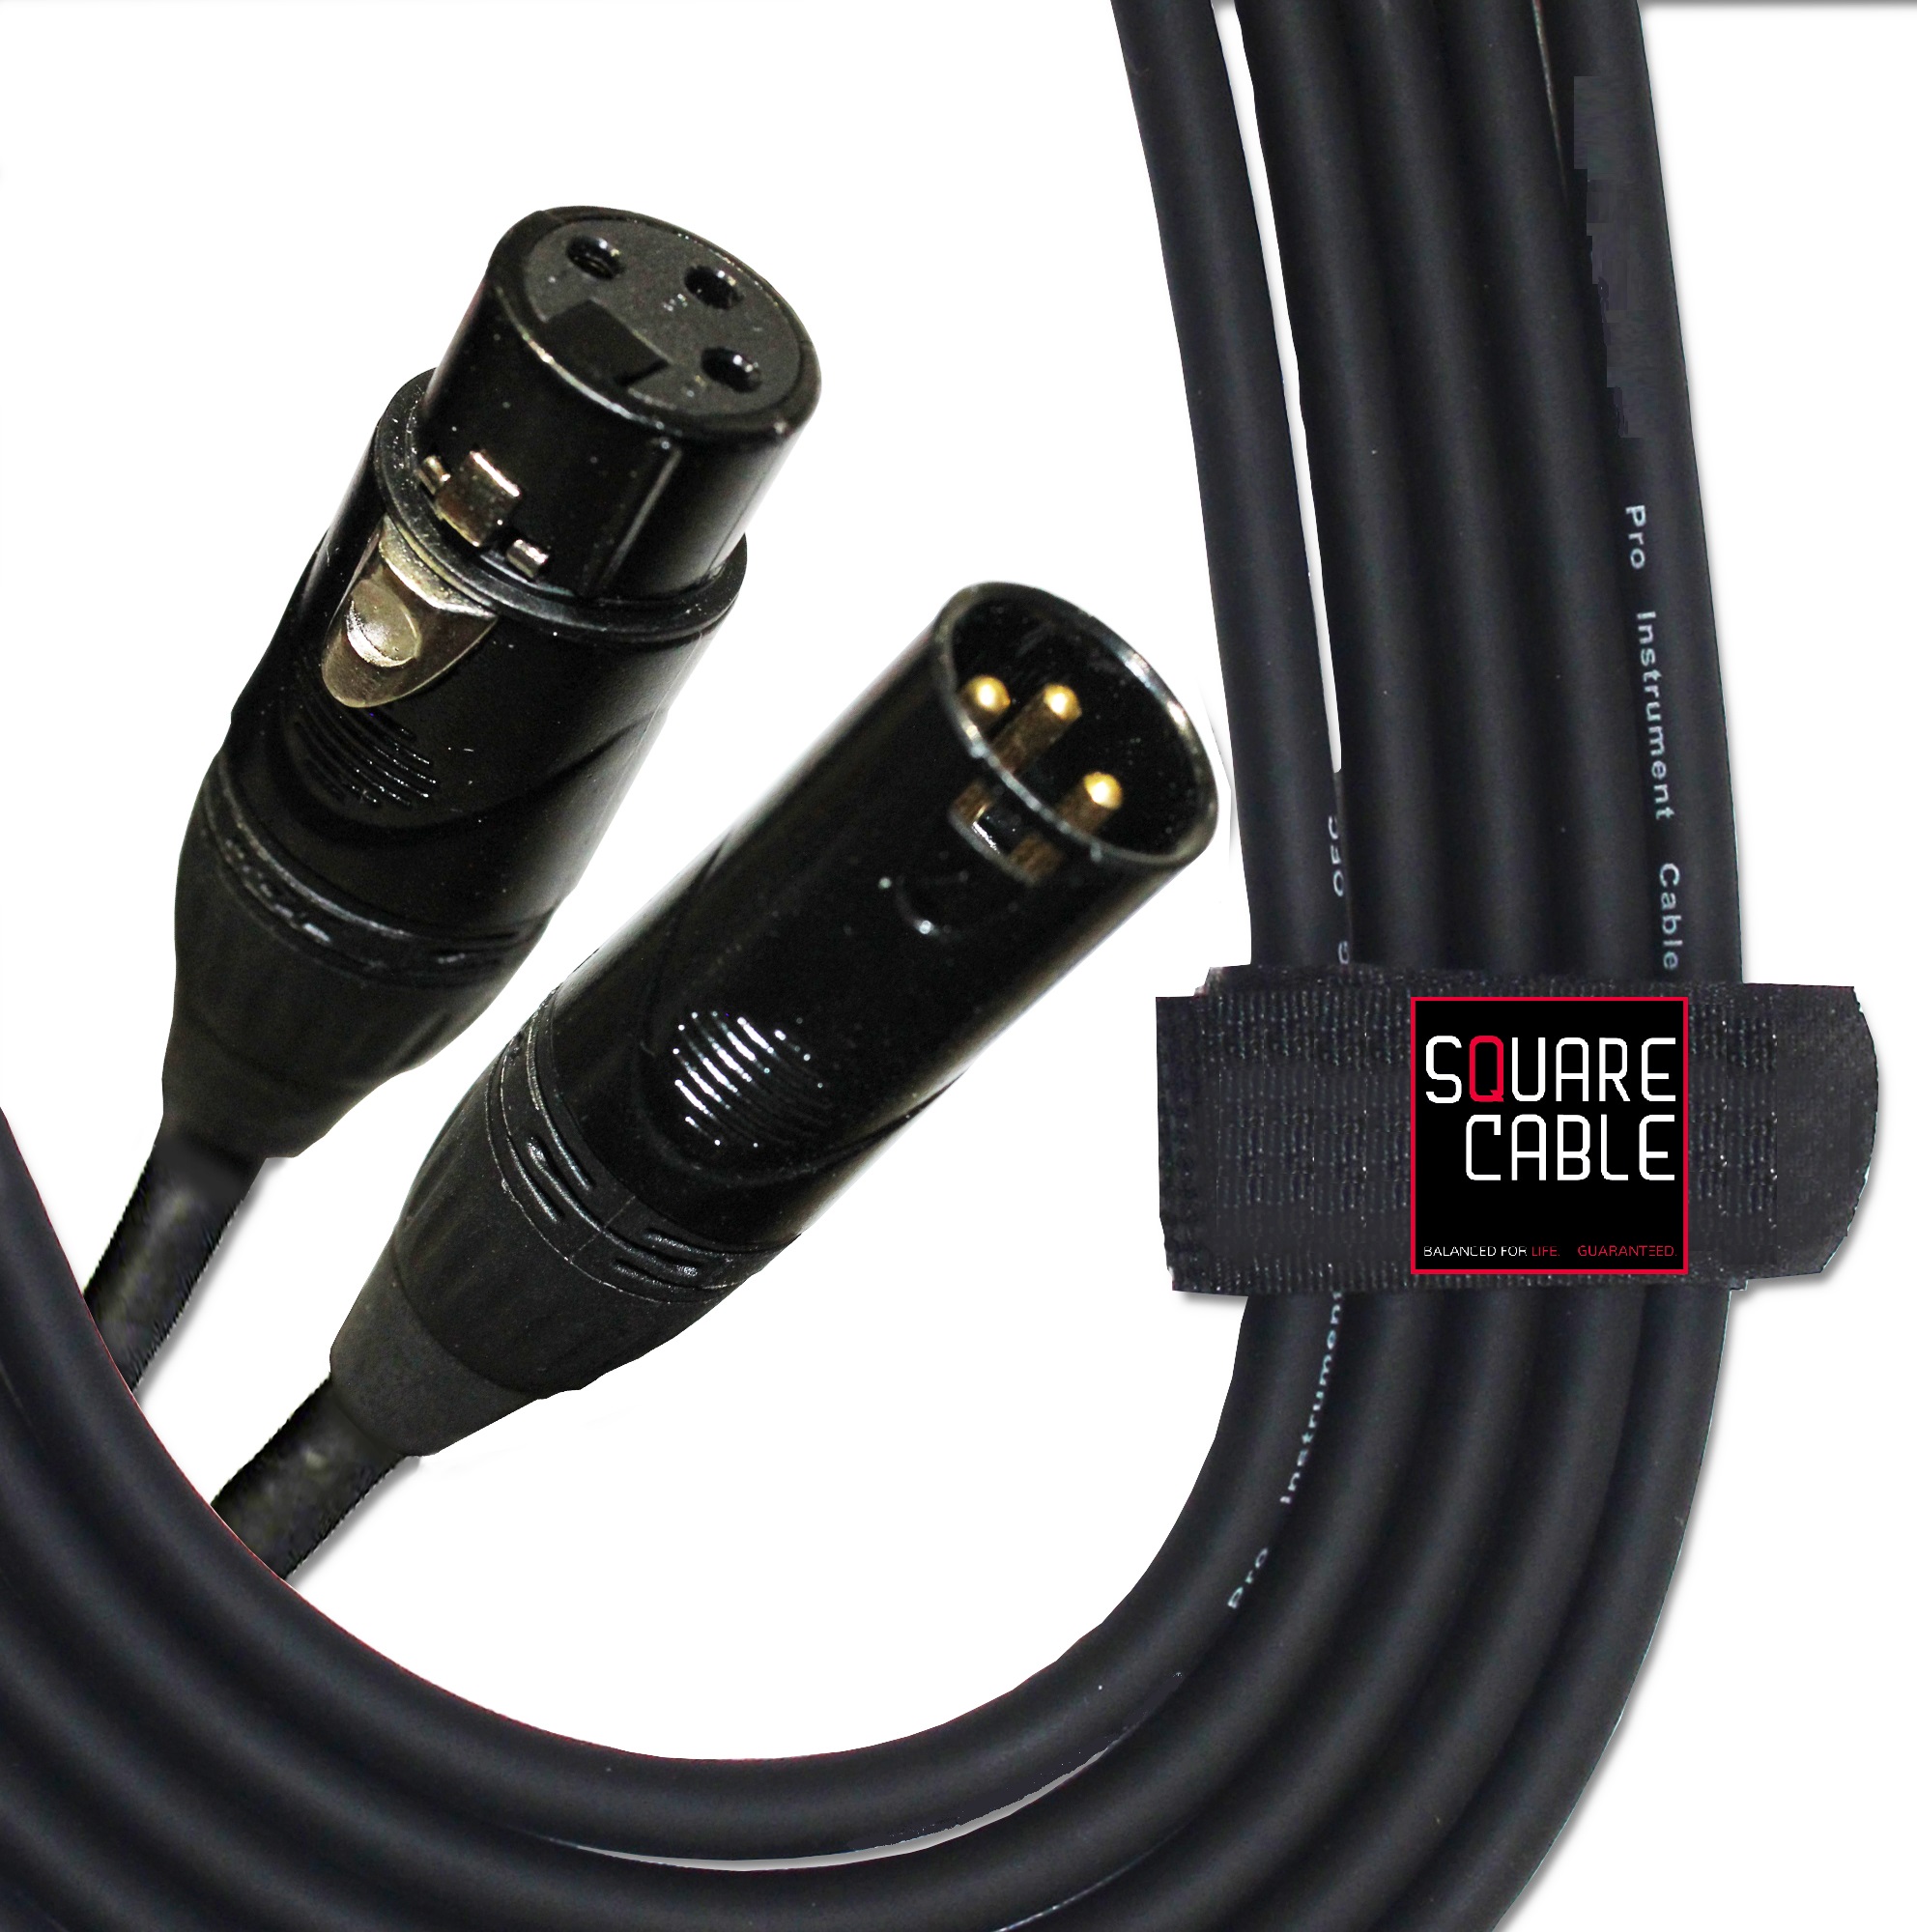 square-cable-dmx-05--5ft-dmx-cable-3-pin.jpg